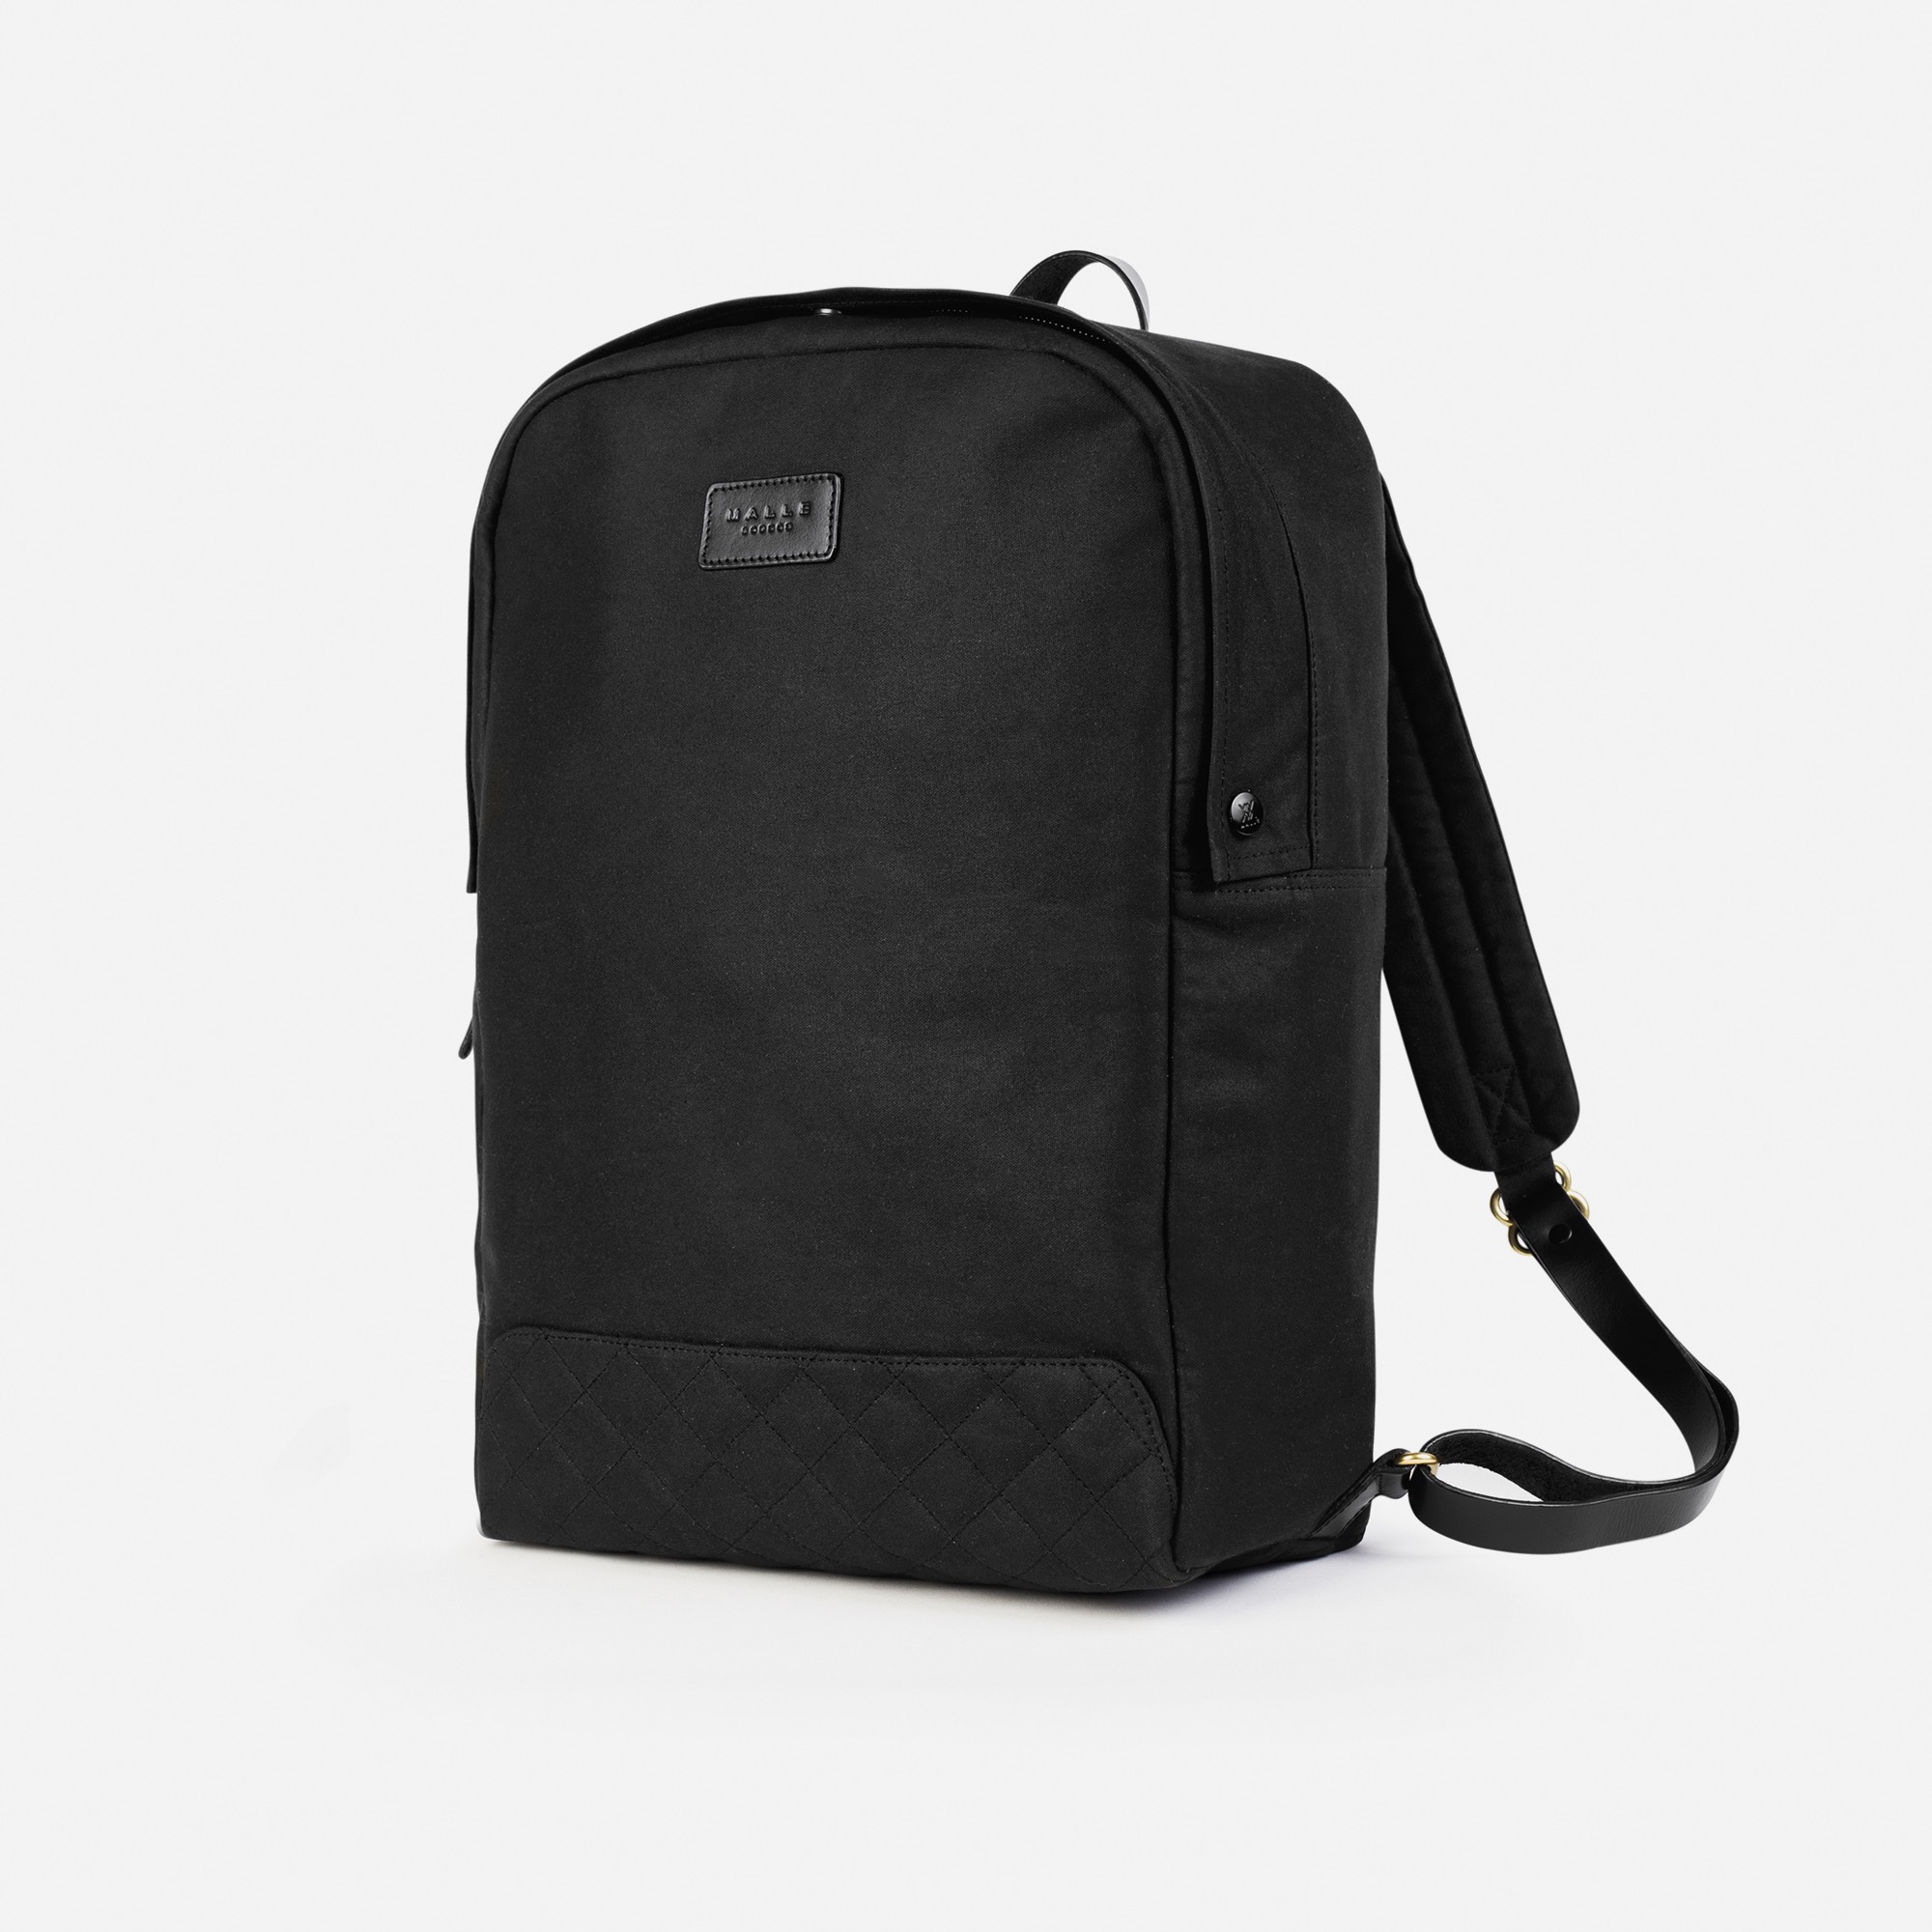 Malle London Edward Backpack - Be Prepared to Get Lost